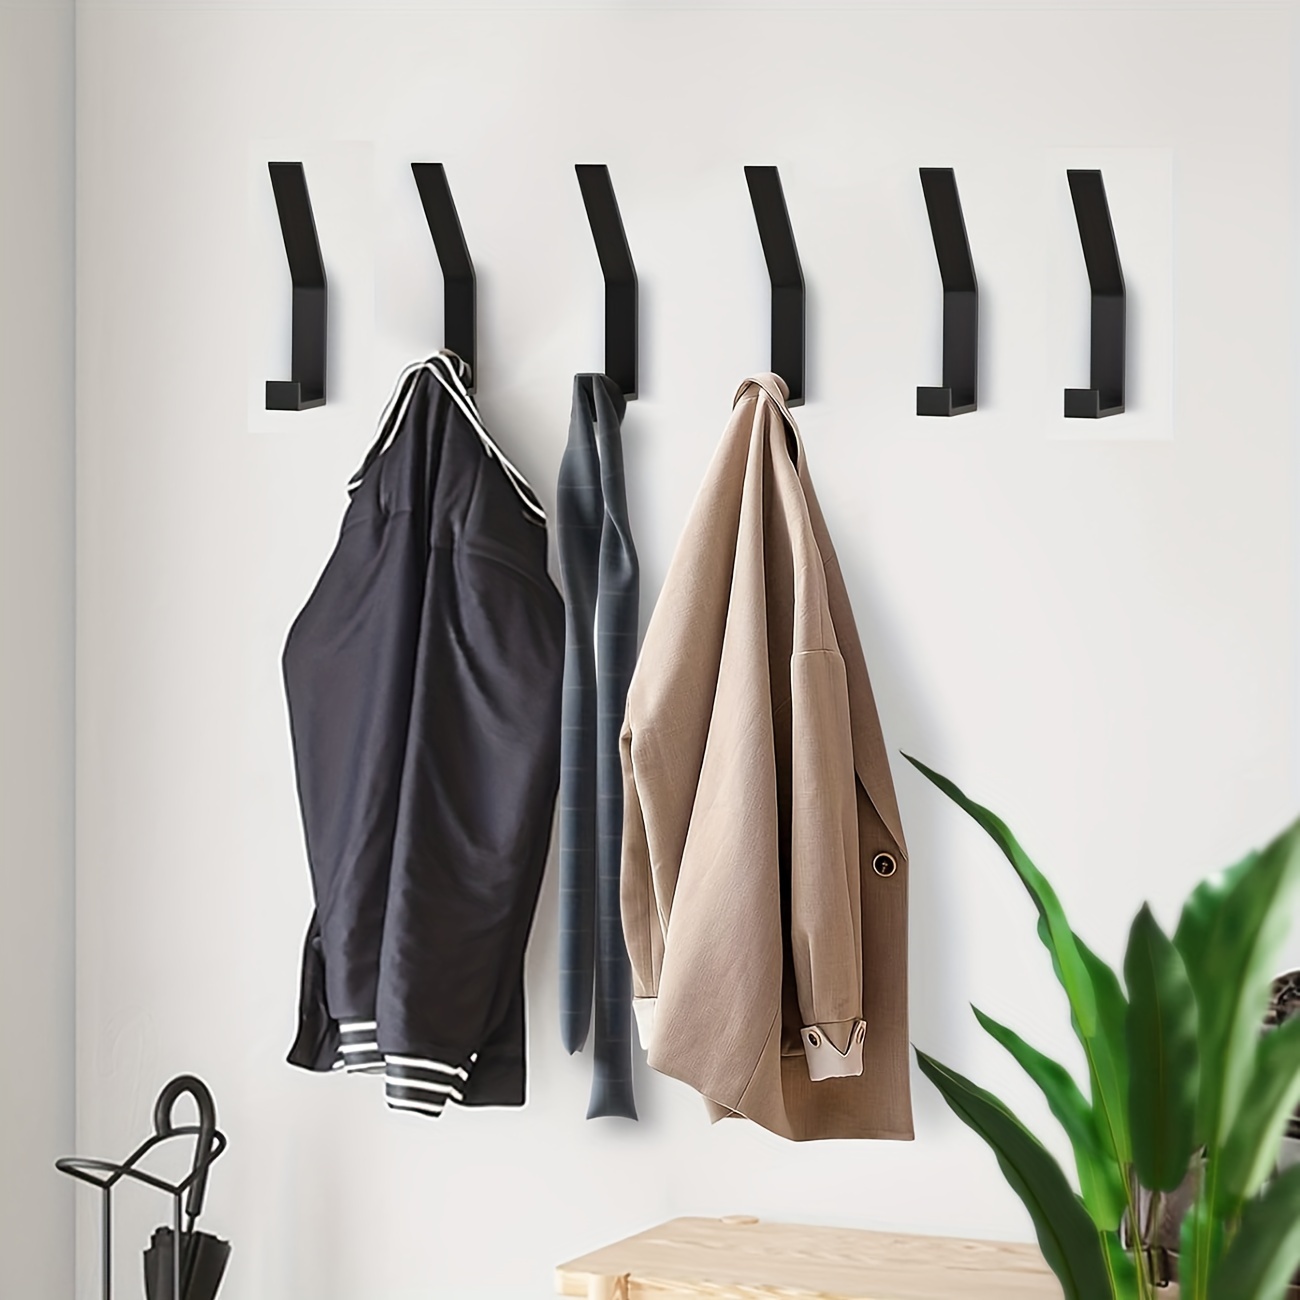 Black Wall Mounted Coat Rack 18 Inch Mounted Coat rack6 Hook Coat Rack  Wall Mounted for Hanging Coats, Jacket,Hats, Bags, Backpacks, Towels, and  More -Ideal for Homes, Offices, Bedroom, Mudroo : 